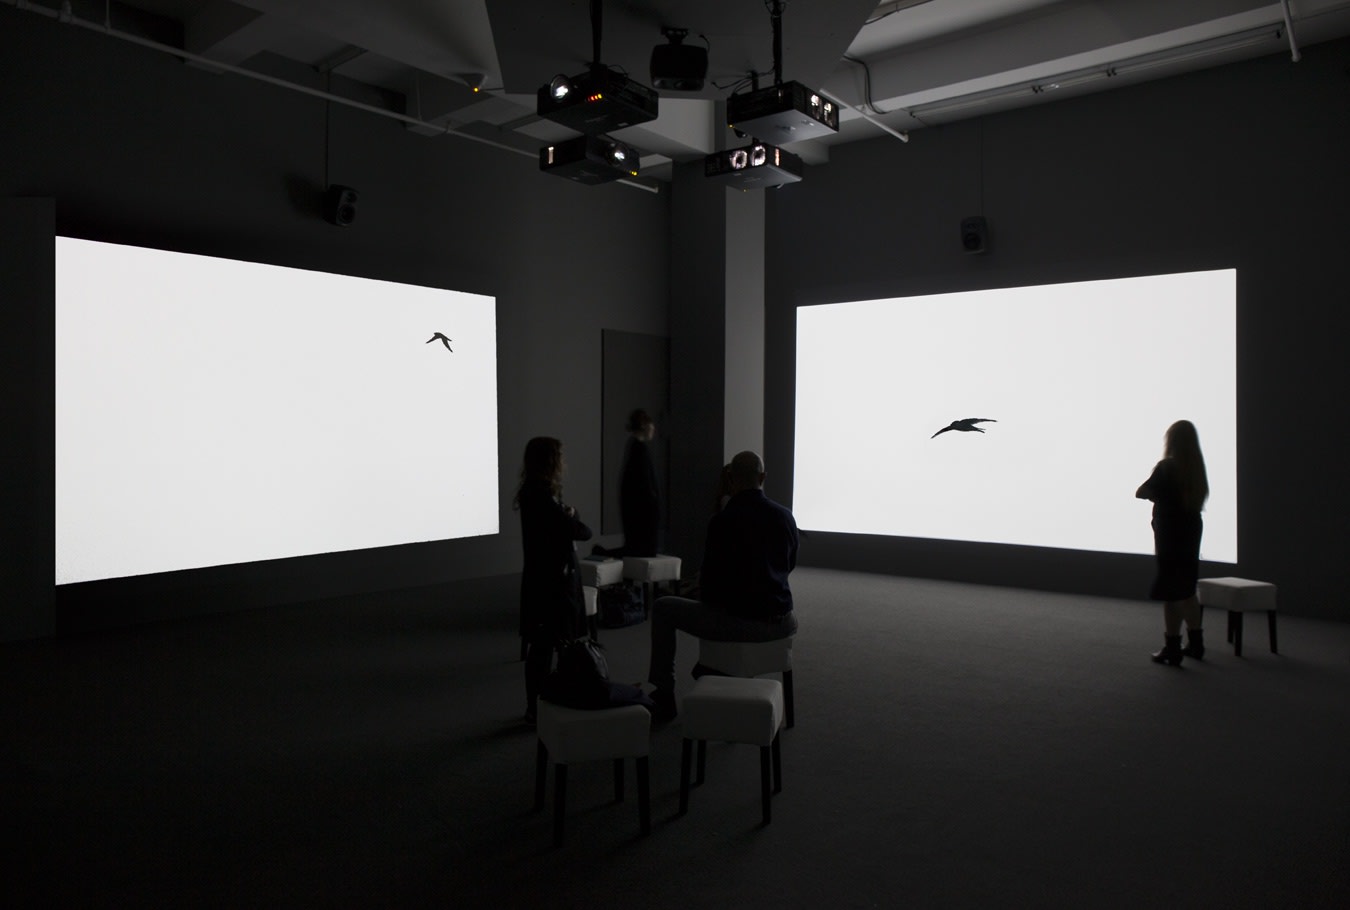 Gallery installation of two projections of bird silhouettes against a white background.